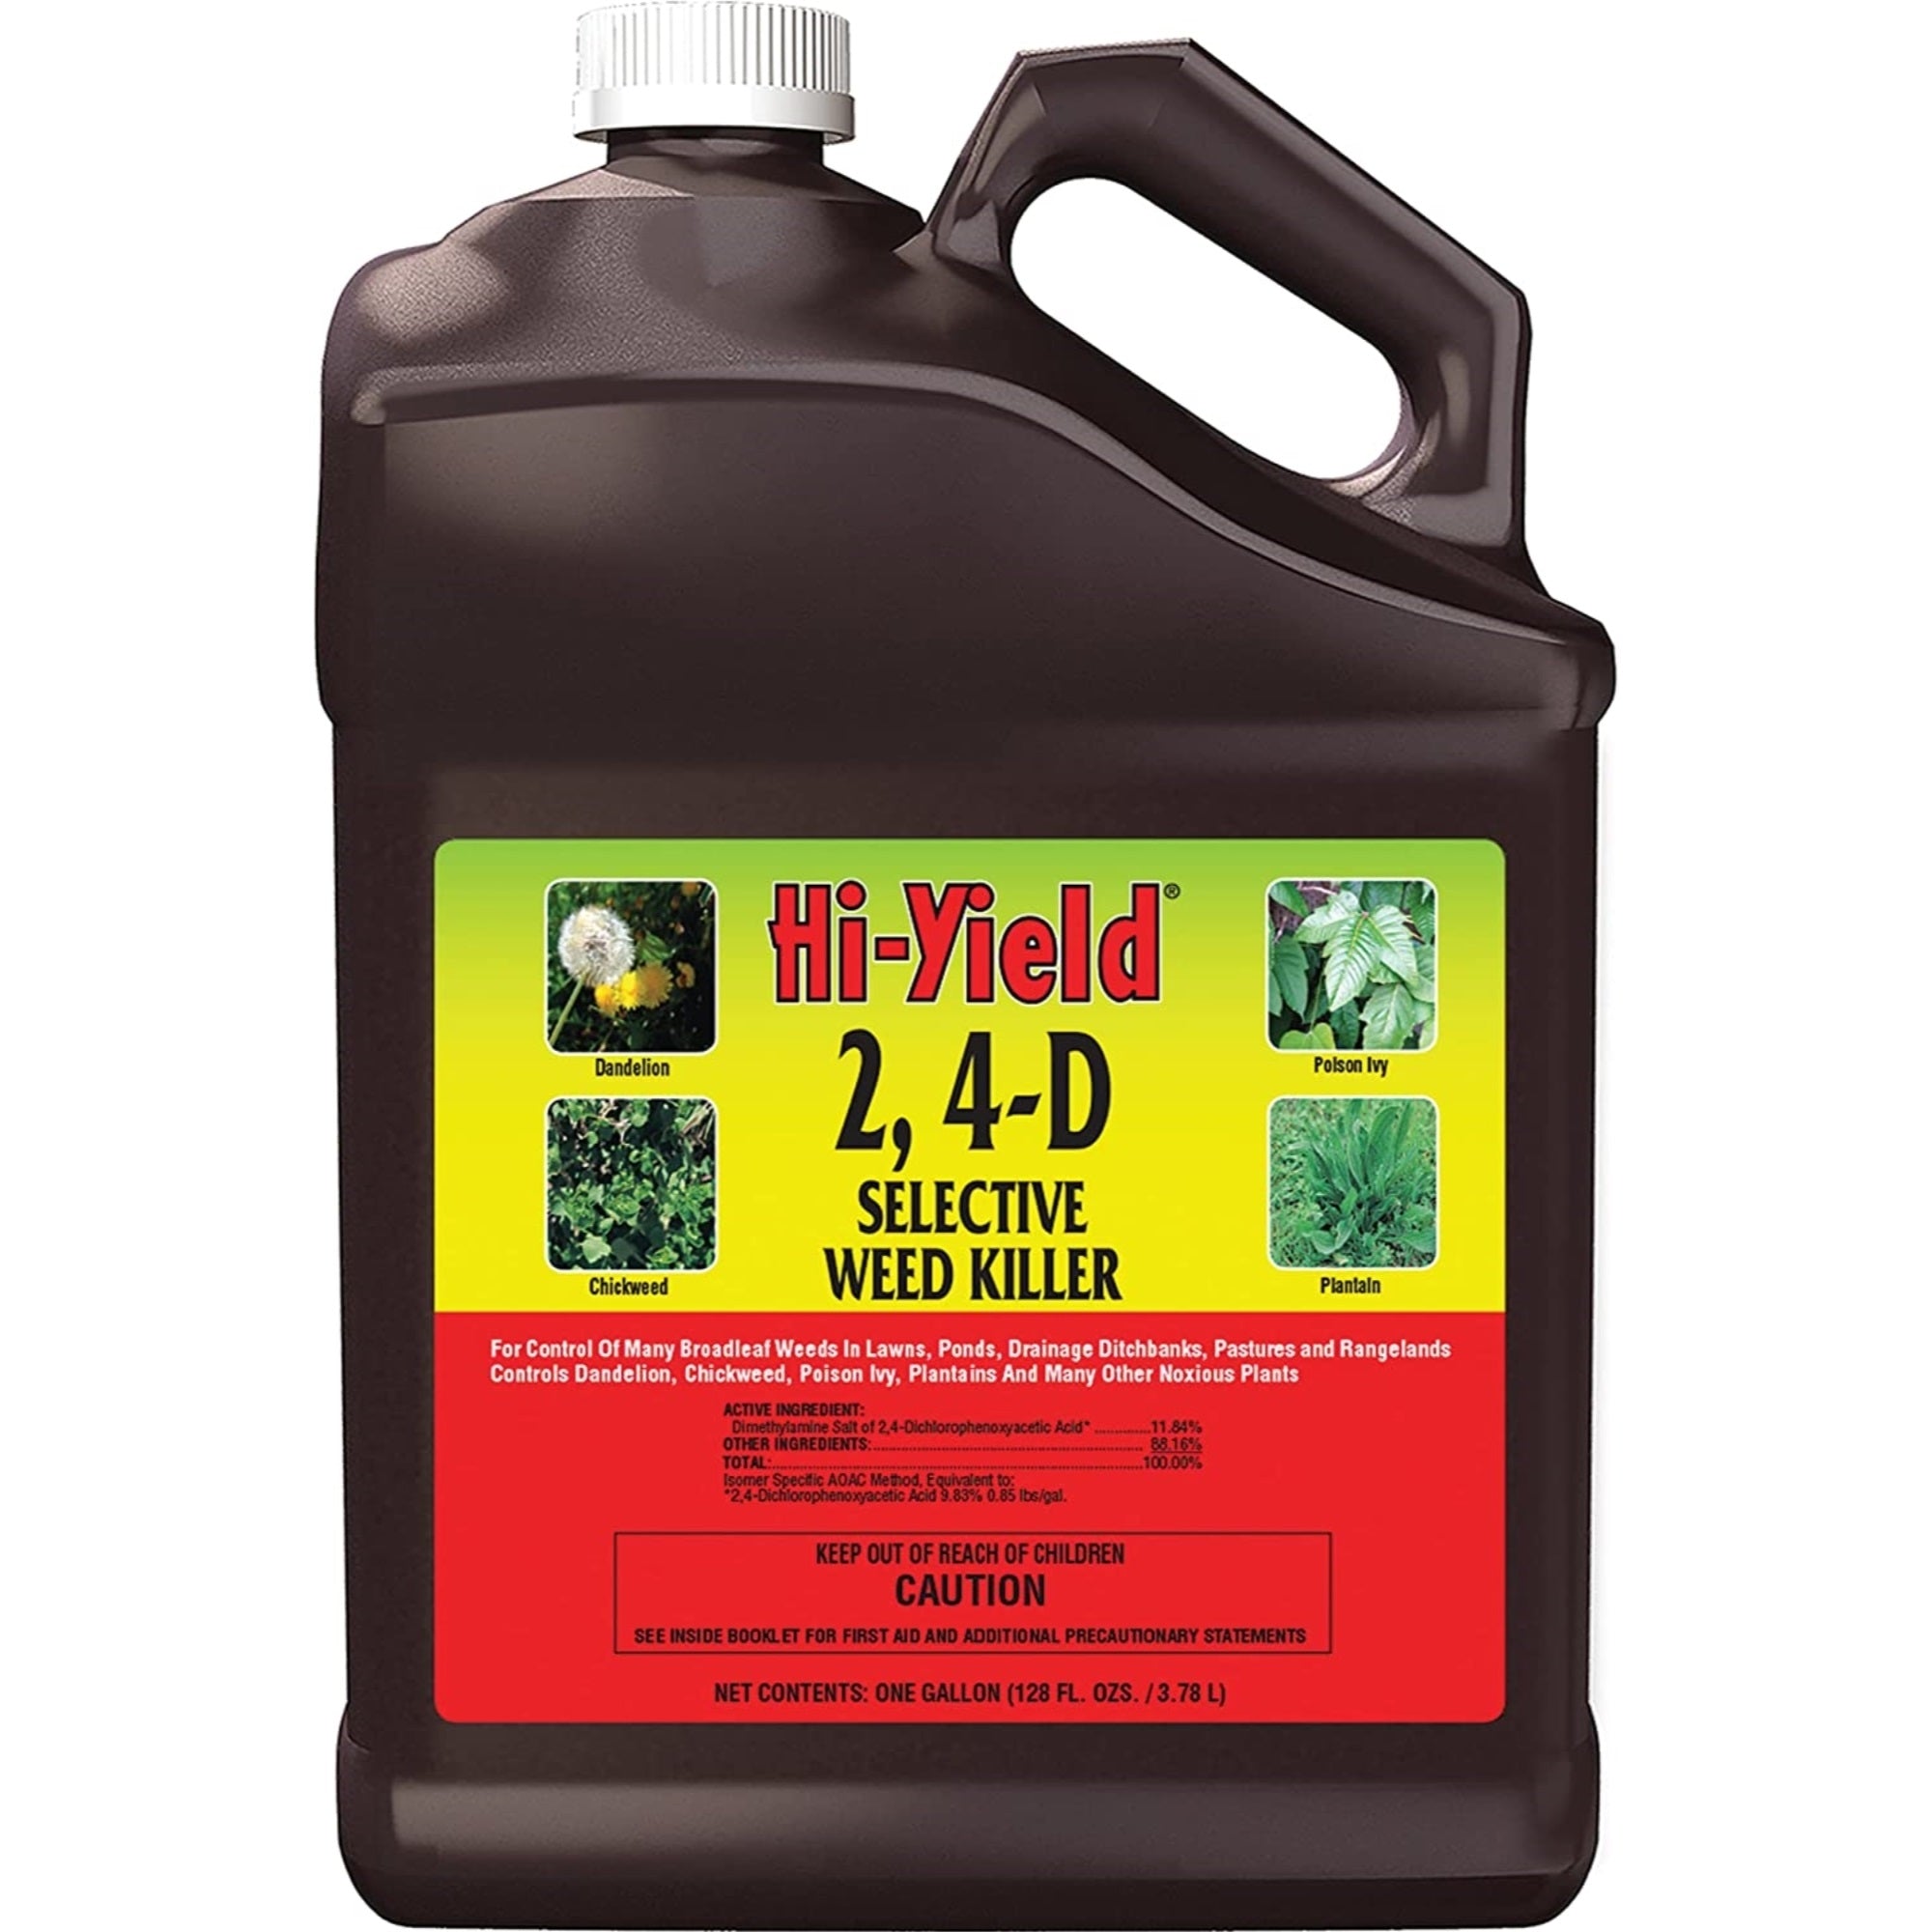 VPG Hi-Yield 2,4-D Selective Weed Killer Concentrate, 1 gallon